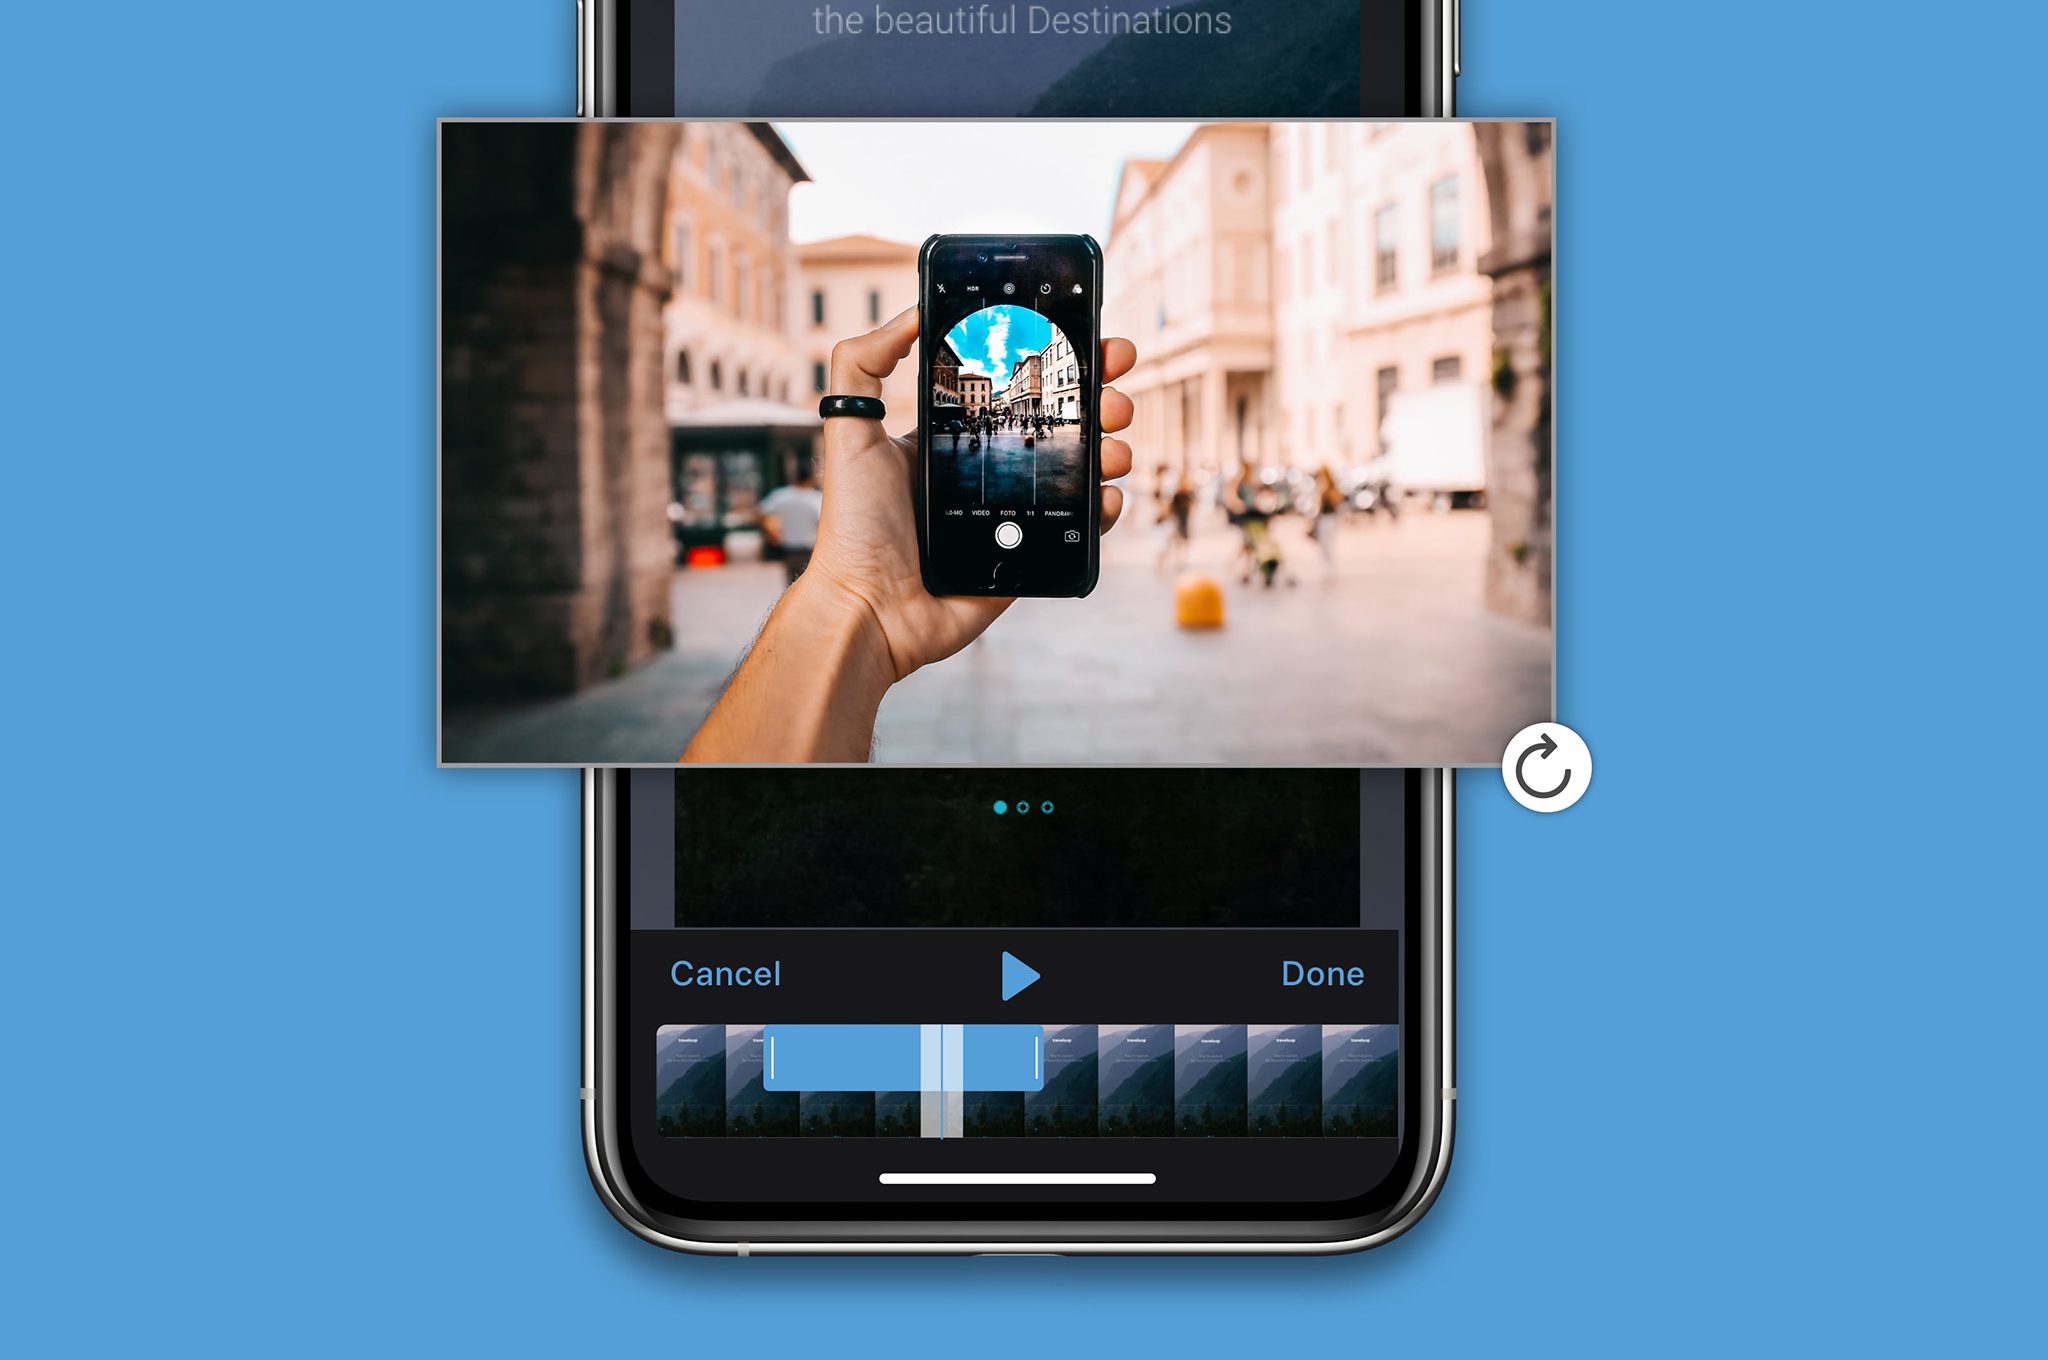 Android Video Editor